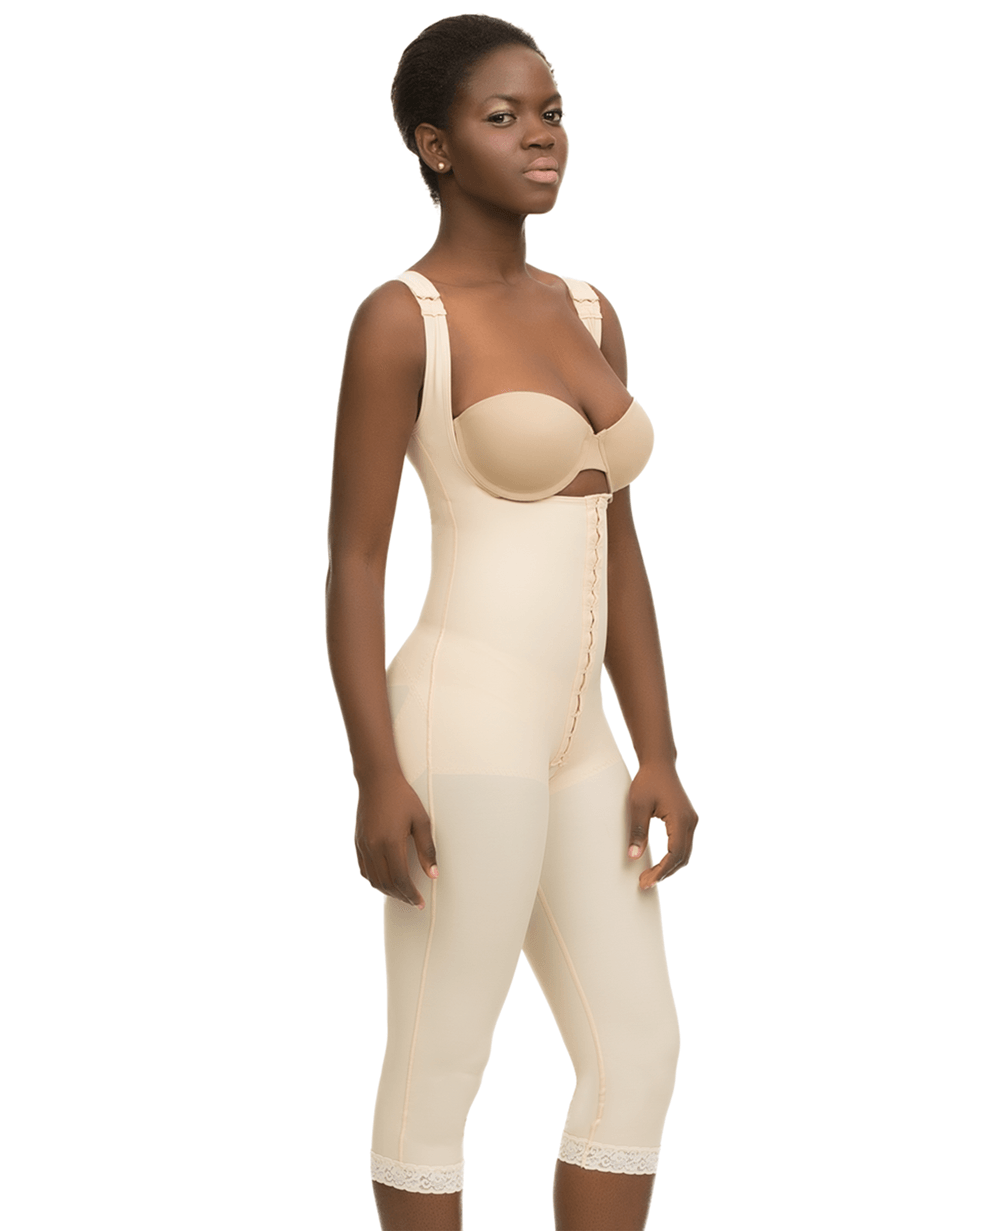 GluteLifting Below the Knee Bodysuit w/Front Closure & High Back (BE13